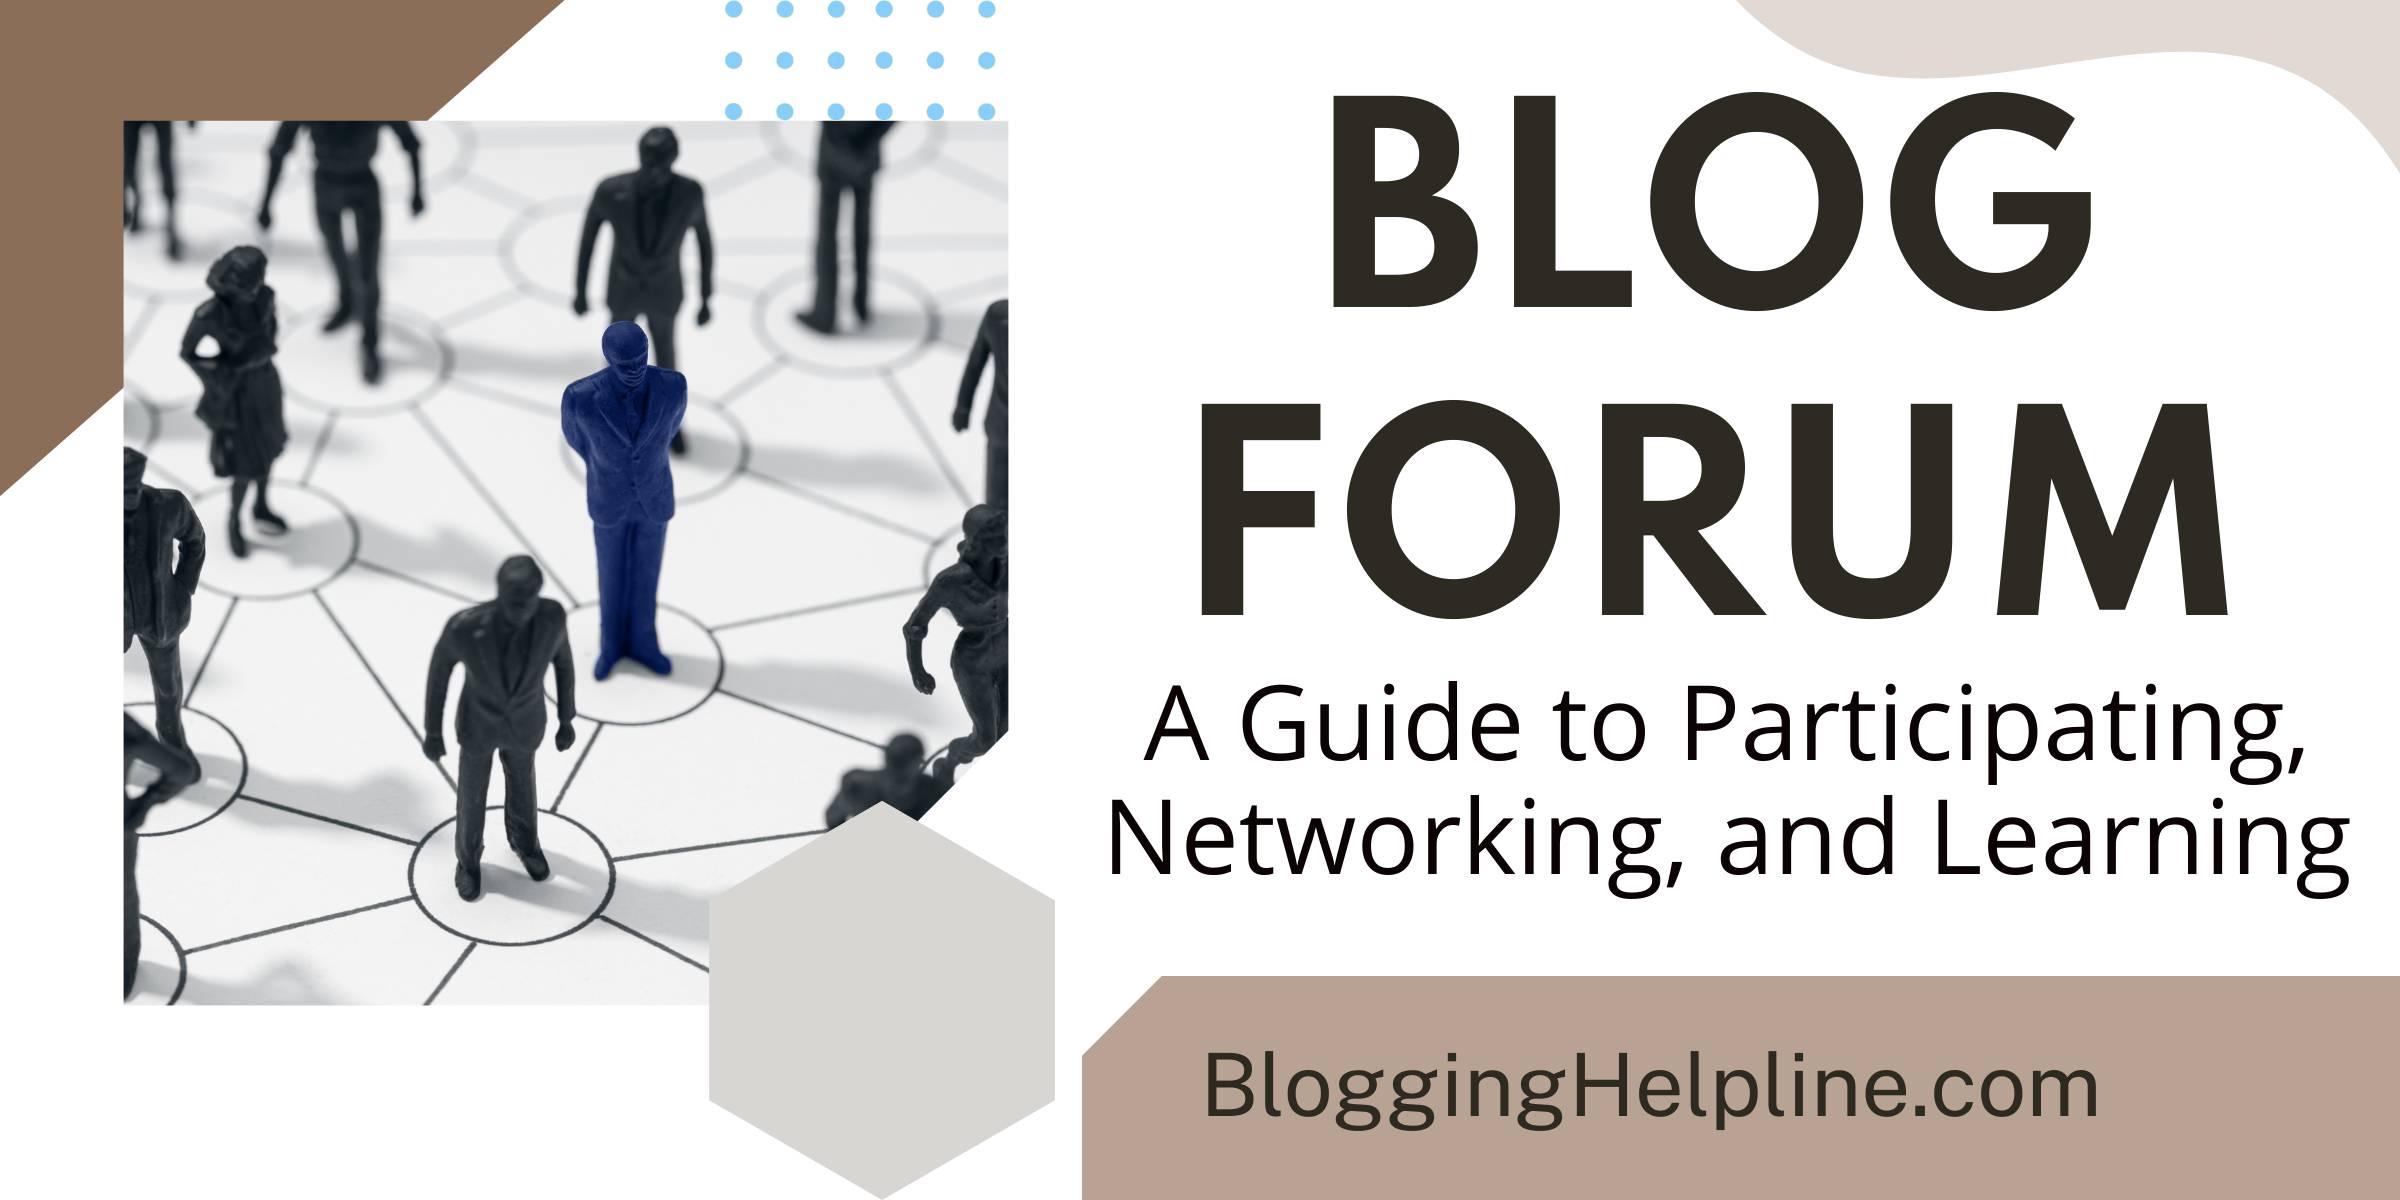 Blog Forum A Guide to Participating, Networking, and Learning